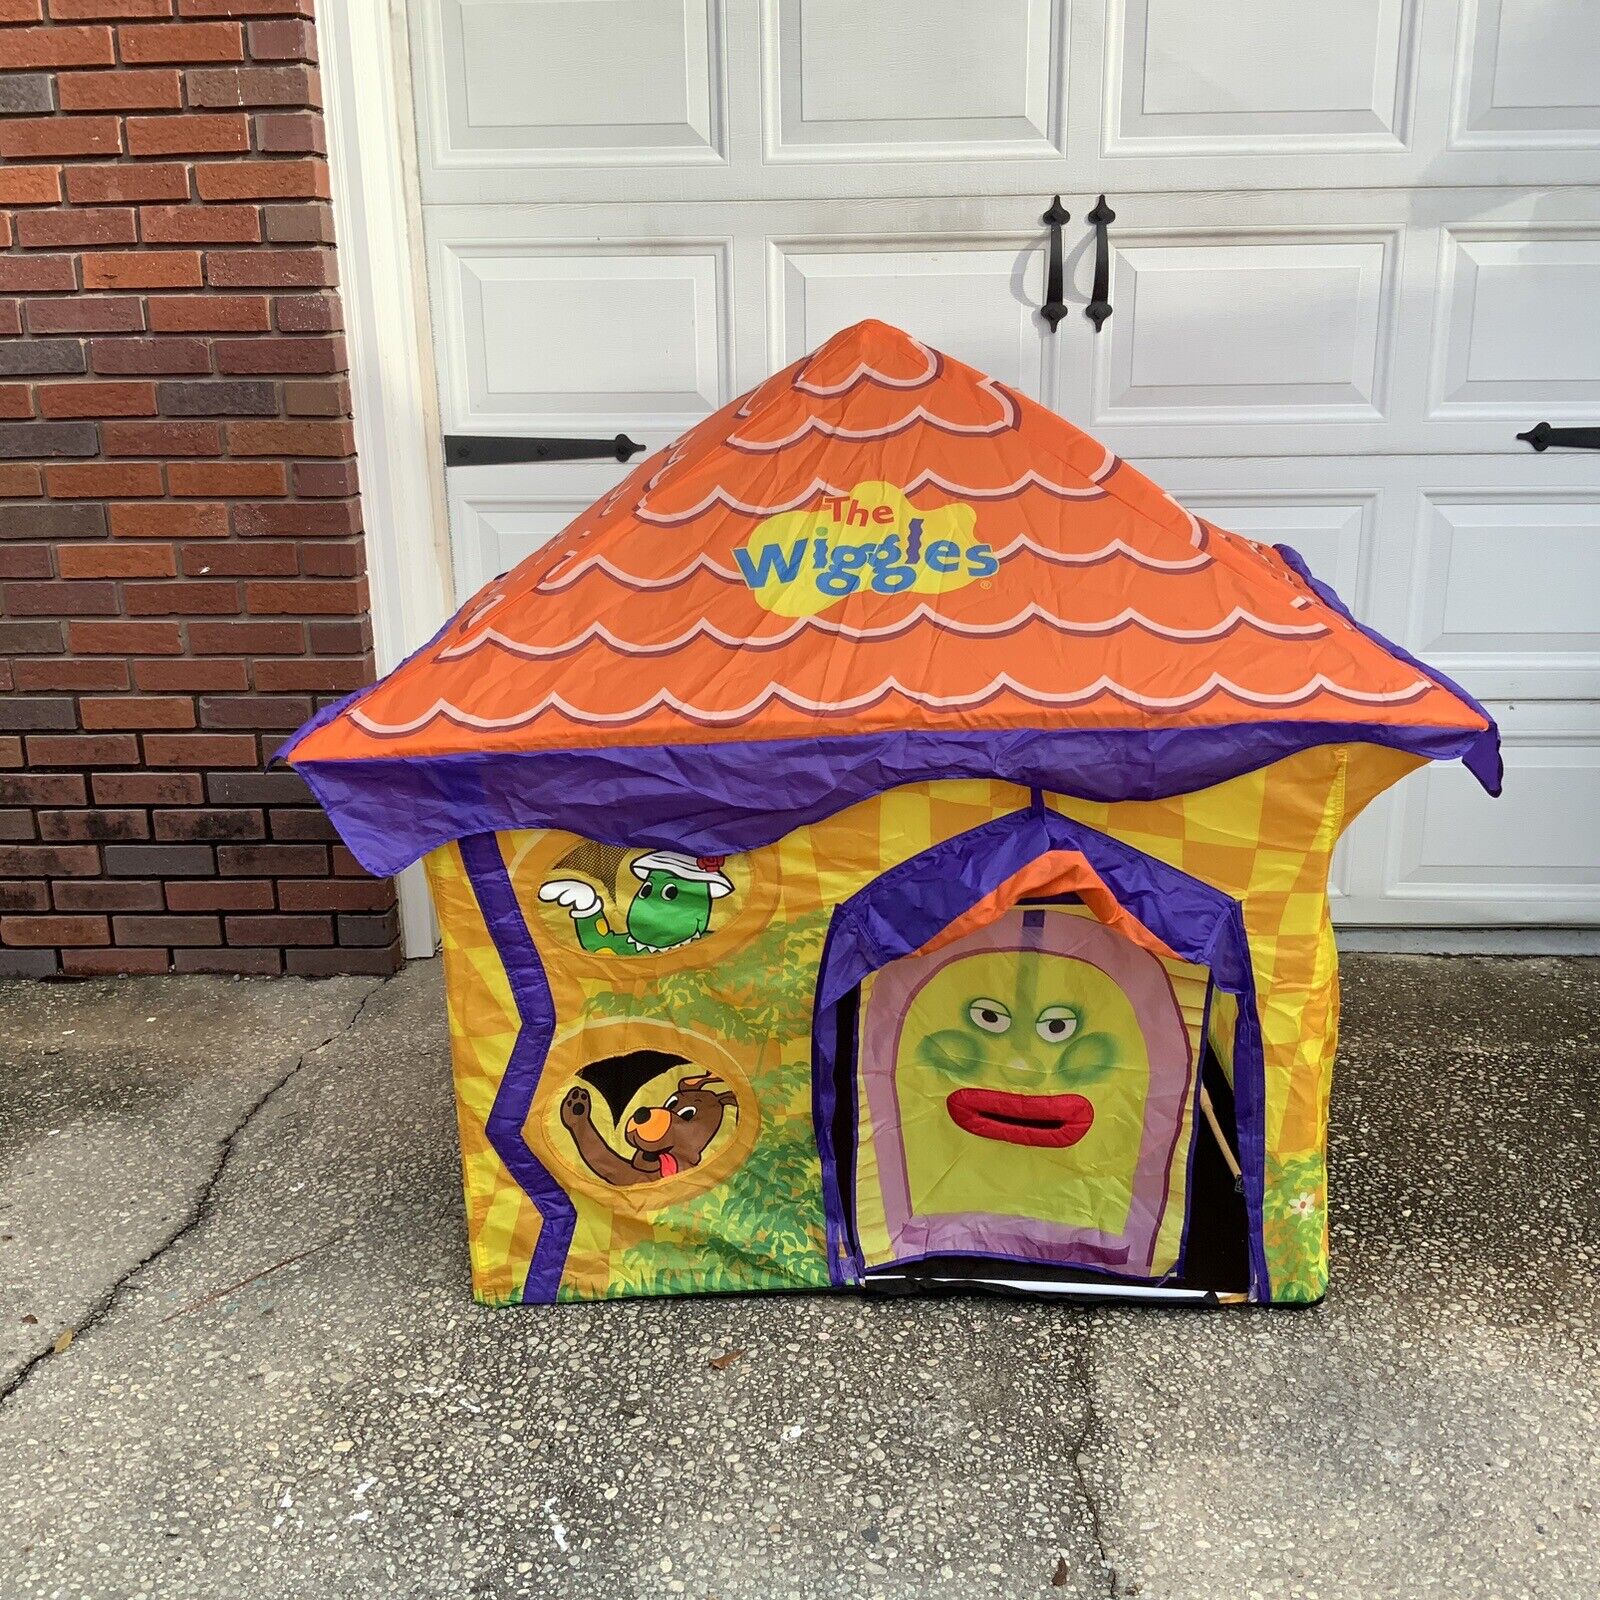 The Wiggles Play Tent Vintage 2003 45.6” X 53.5” X 42.5” Topns Of Fun